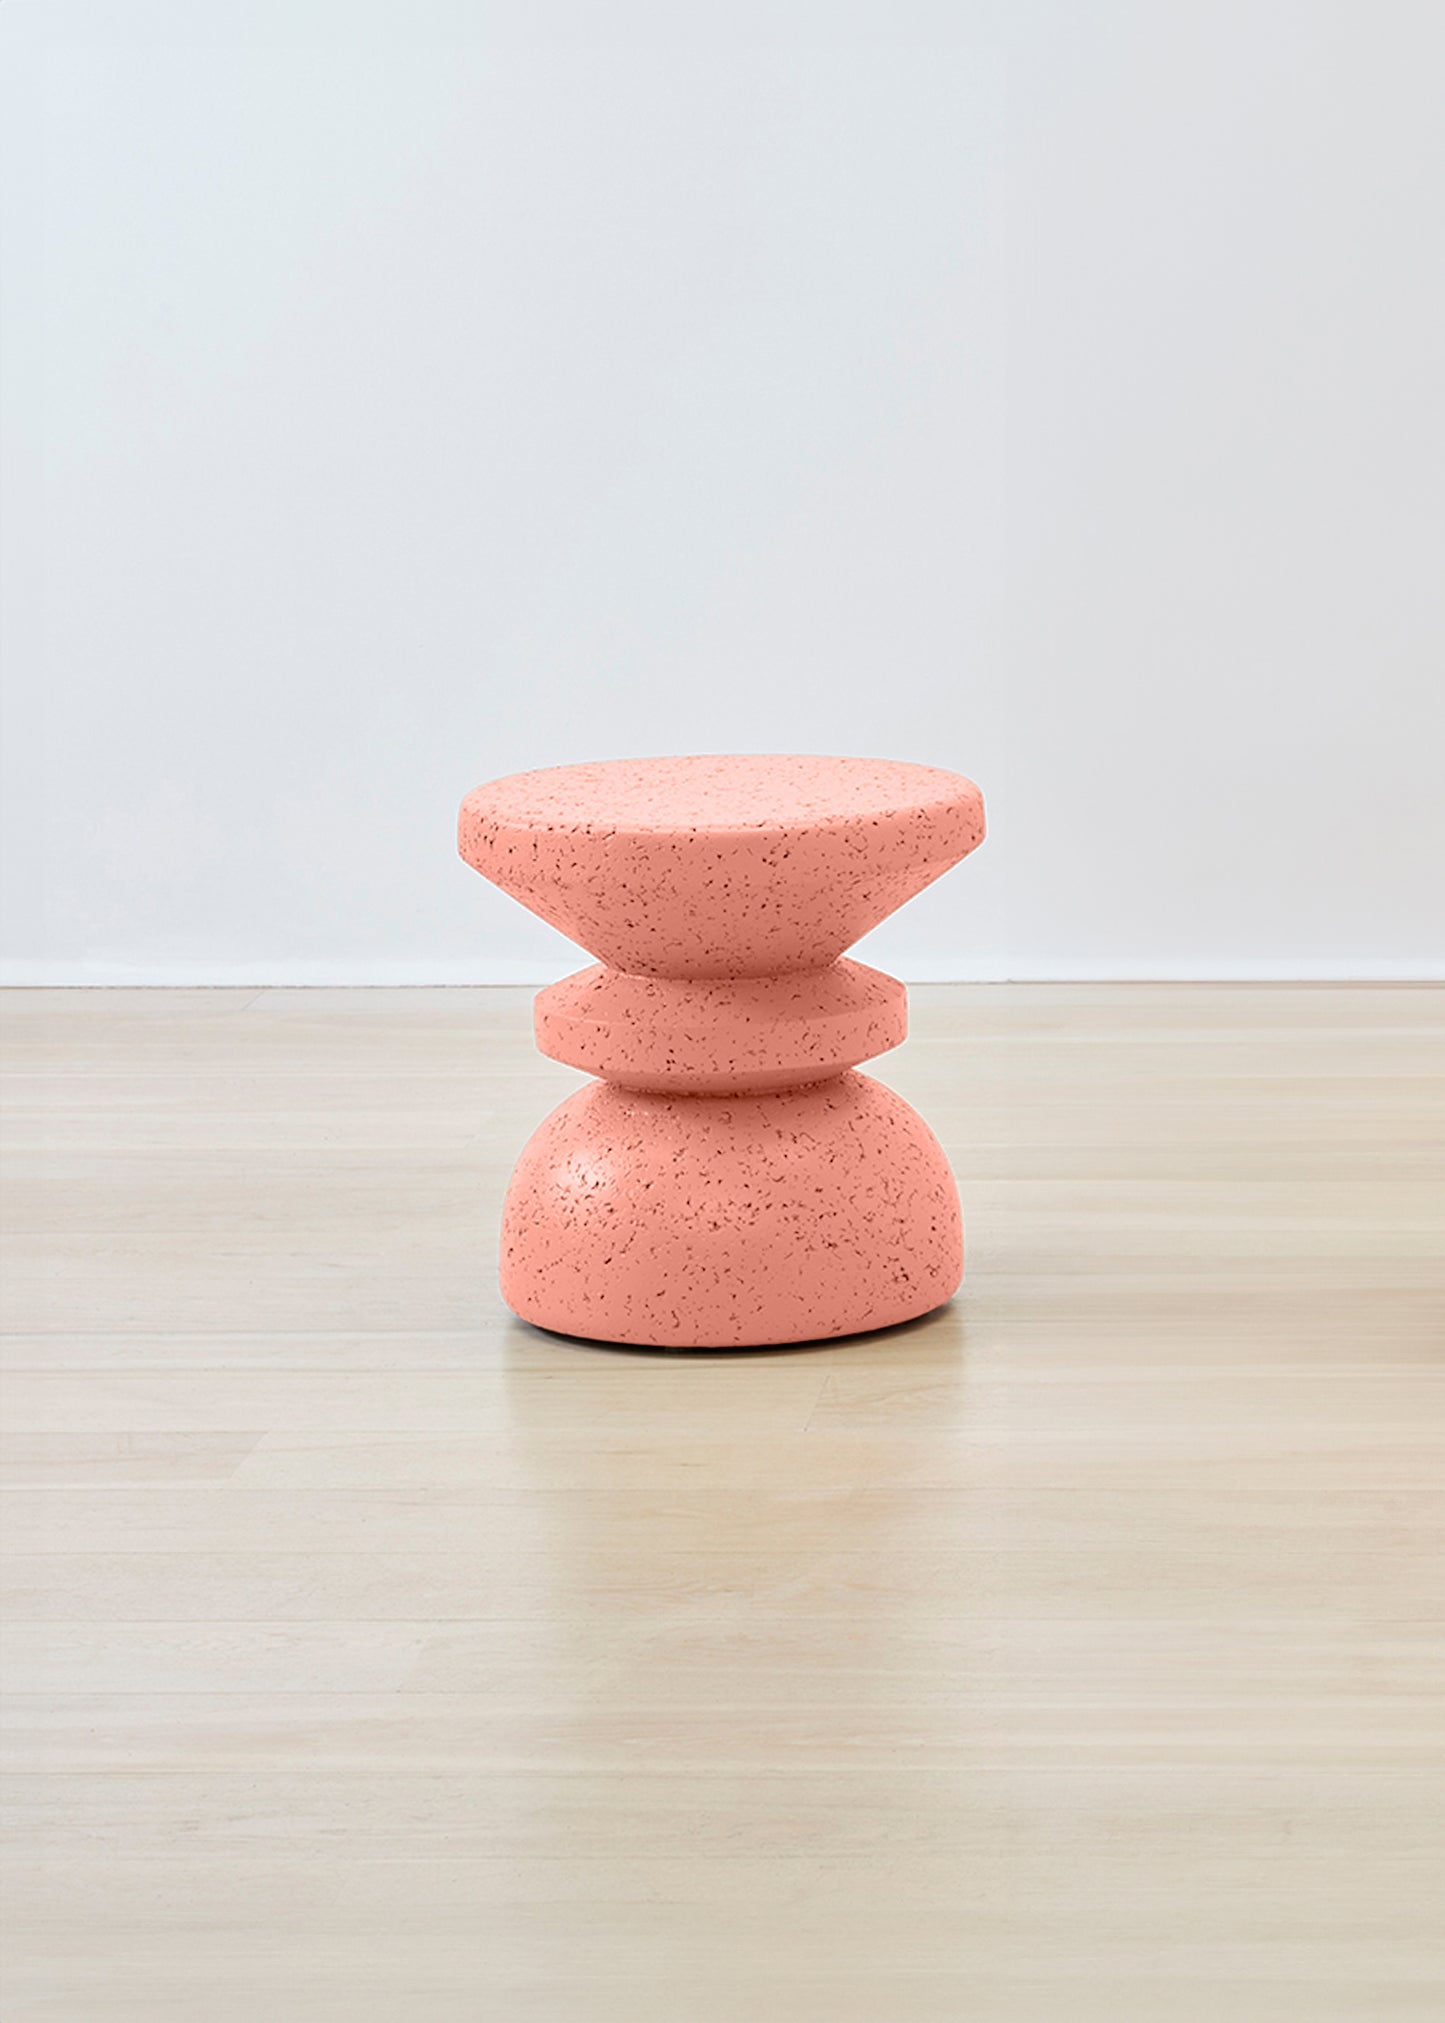 Eye-catching Kanju Wiid Painted African Stacked Cork Stool in a lively coral color, showcasing innovative design and eco-sustainability. This artfully stacked stool combines vibrant appeal with the textured warmth of cork, offering a statement piece that brings both style and environmental consciousness to any interior.